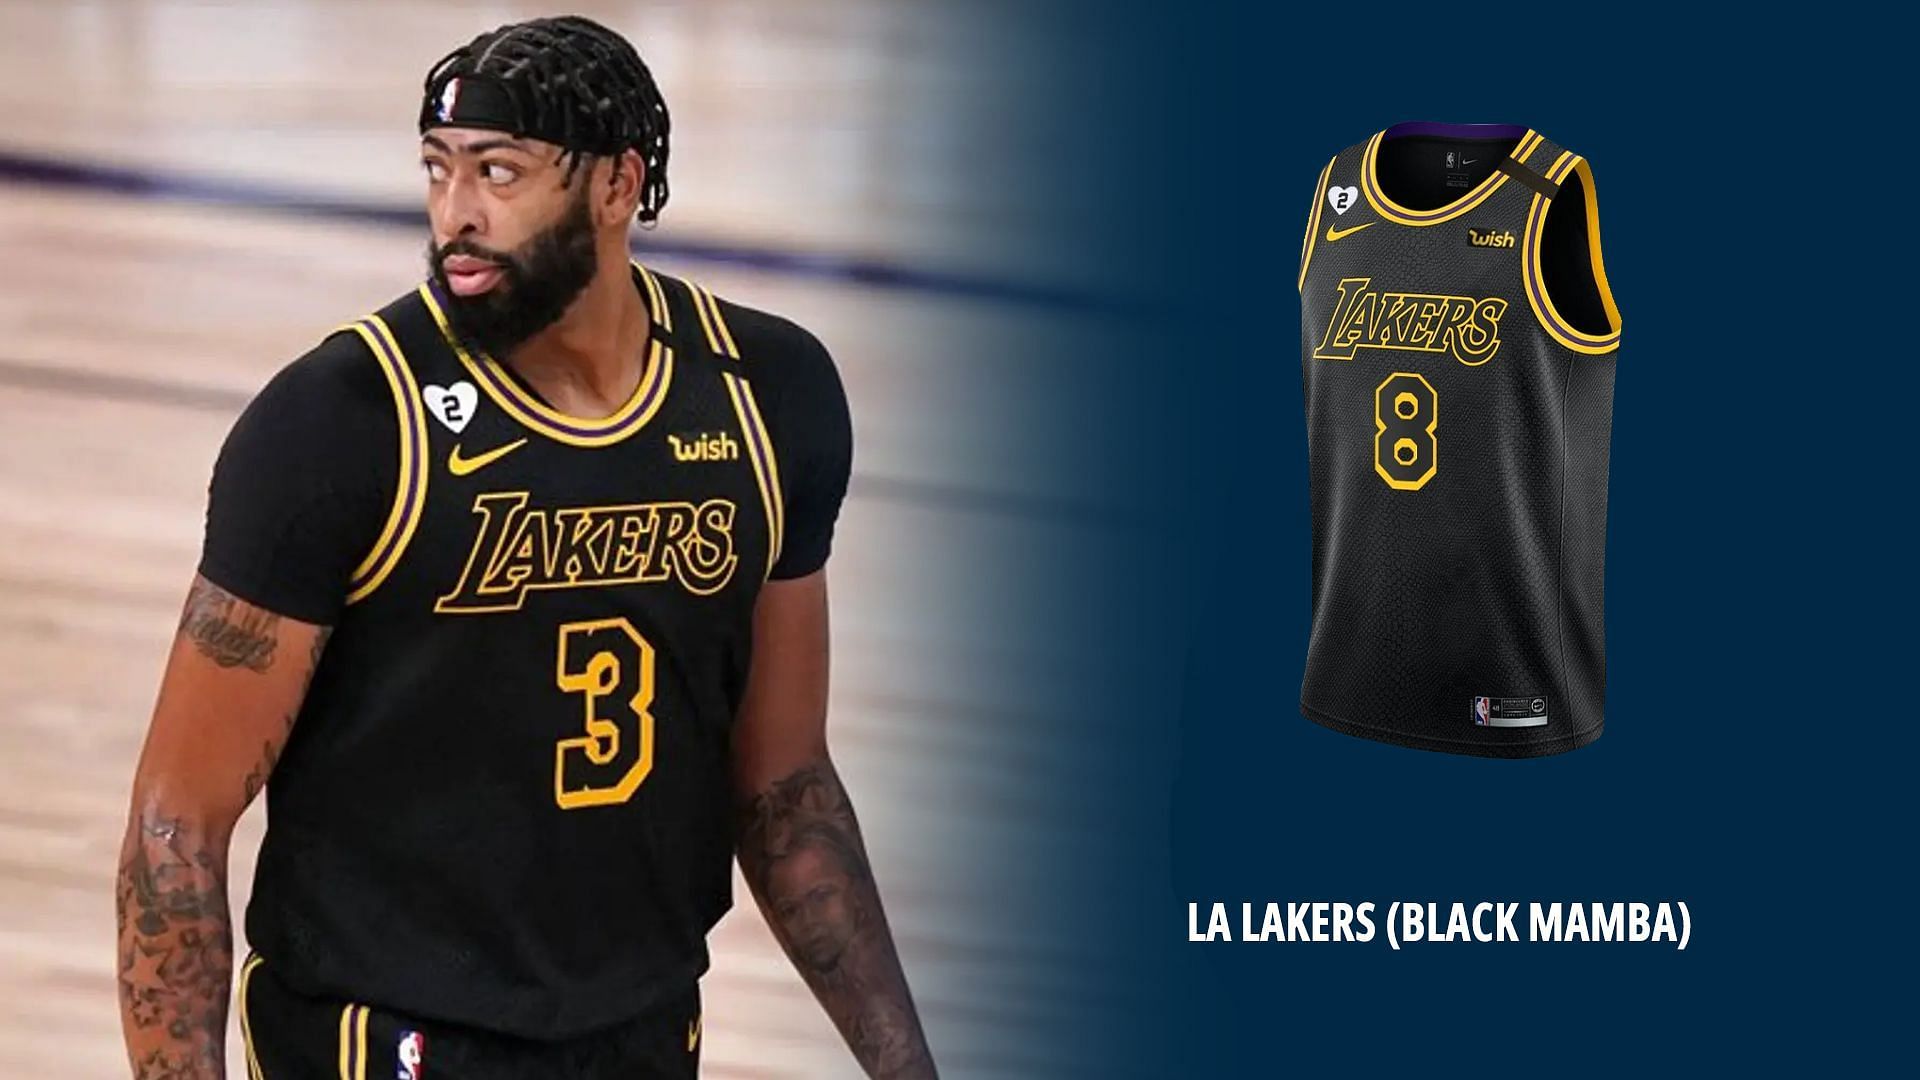 The Lakers had special jerseys to honor Kobe Bryant